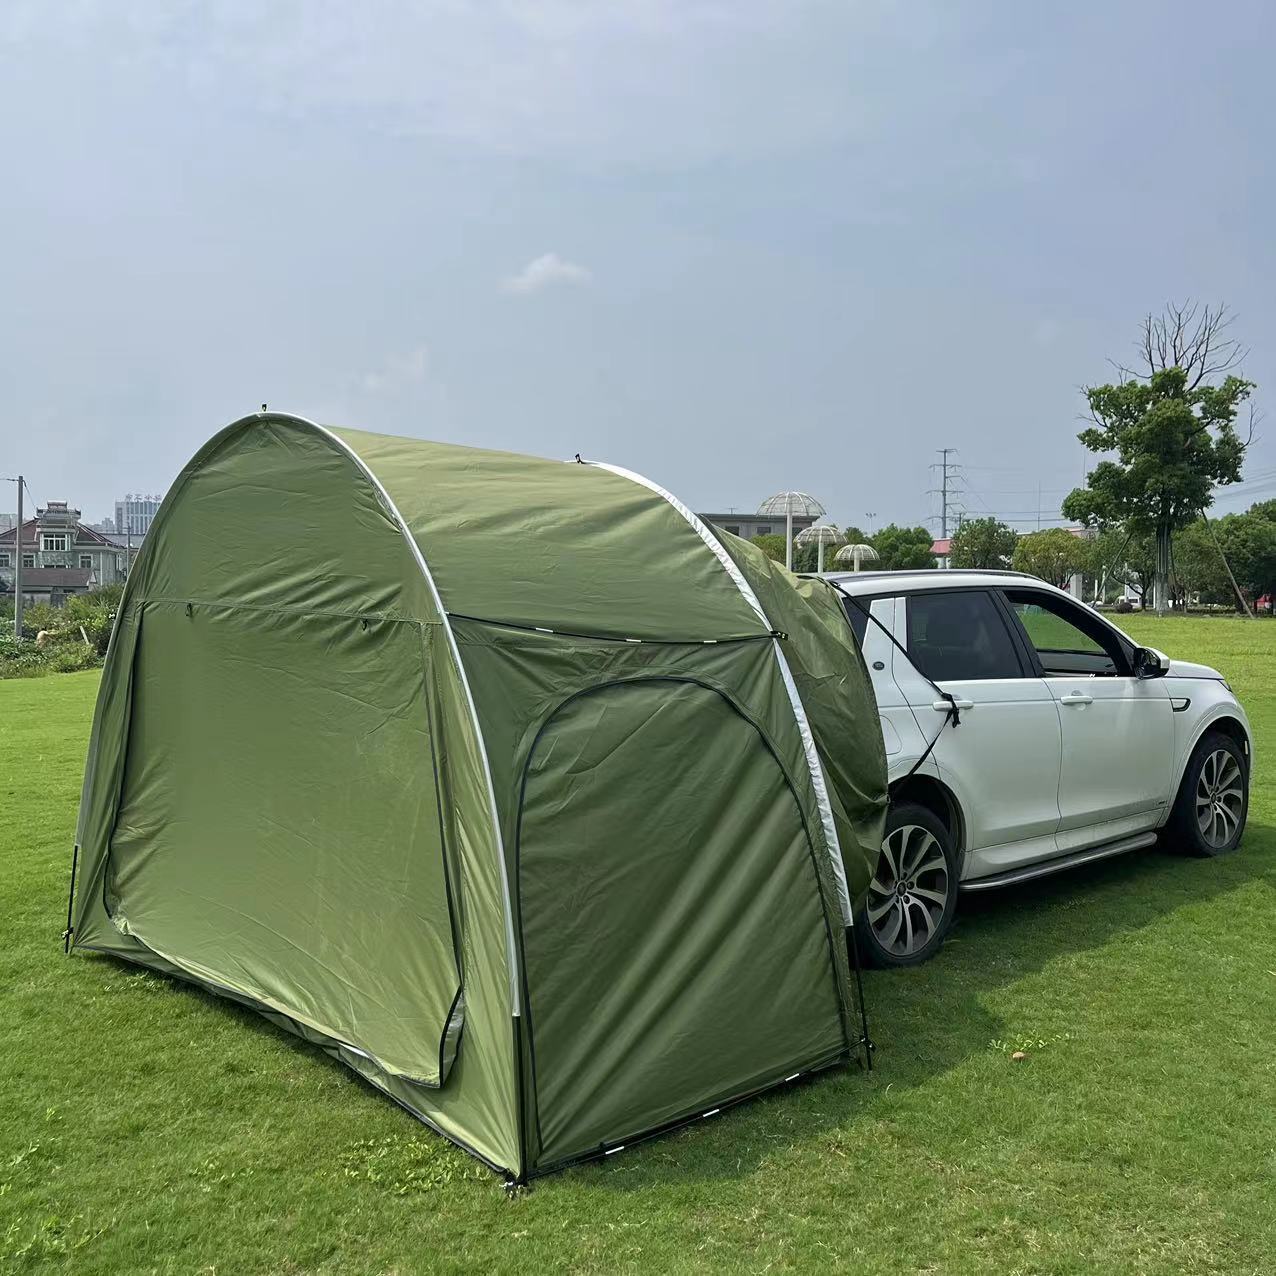 

Quick-setup Waterproof Car Tent For Camping & Outdoor Adventures - Portable Sunshade Shelter With Zip Closure